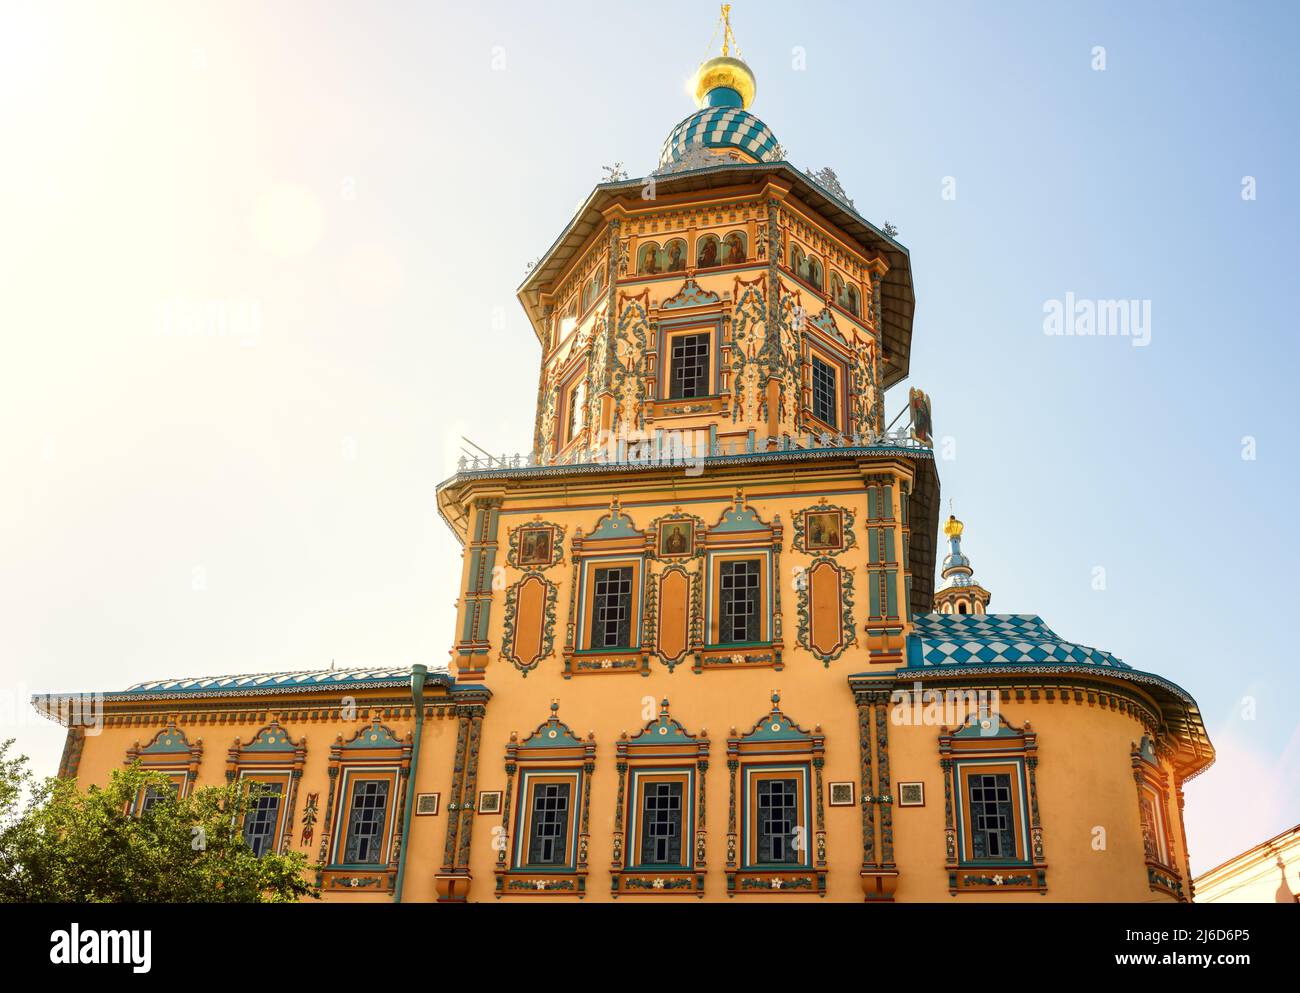 Cathedral of Saints Peter and Paul, Kazan, Tatarstan, Russia. It is tourist attraction of Kazan. Ornate painted Russian Orthodox church in summer, sun Stock Photo